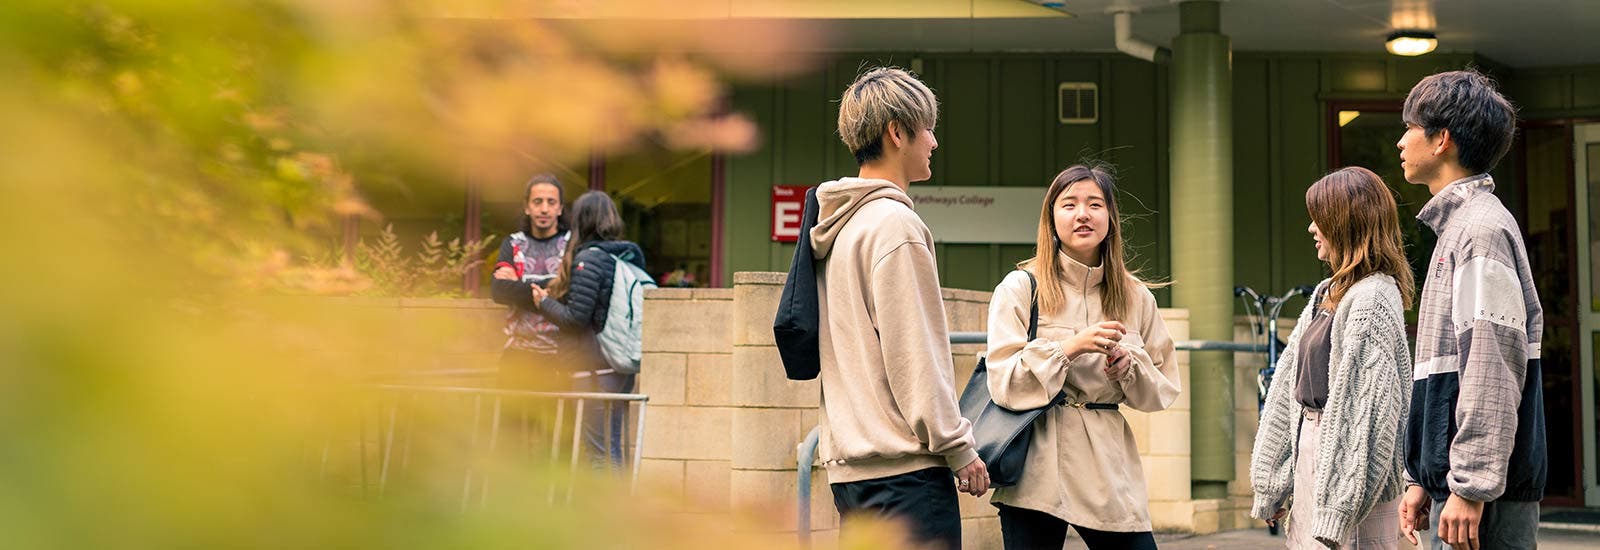 Students standing and talking outside campus